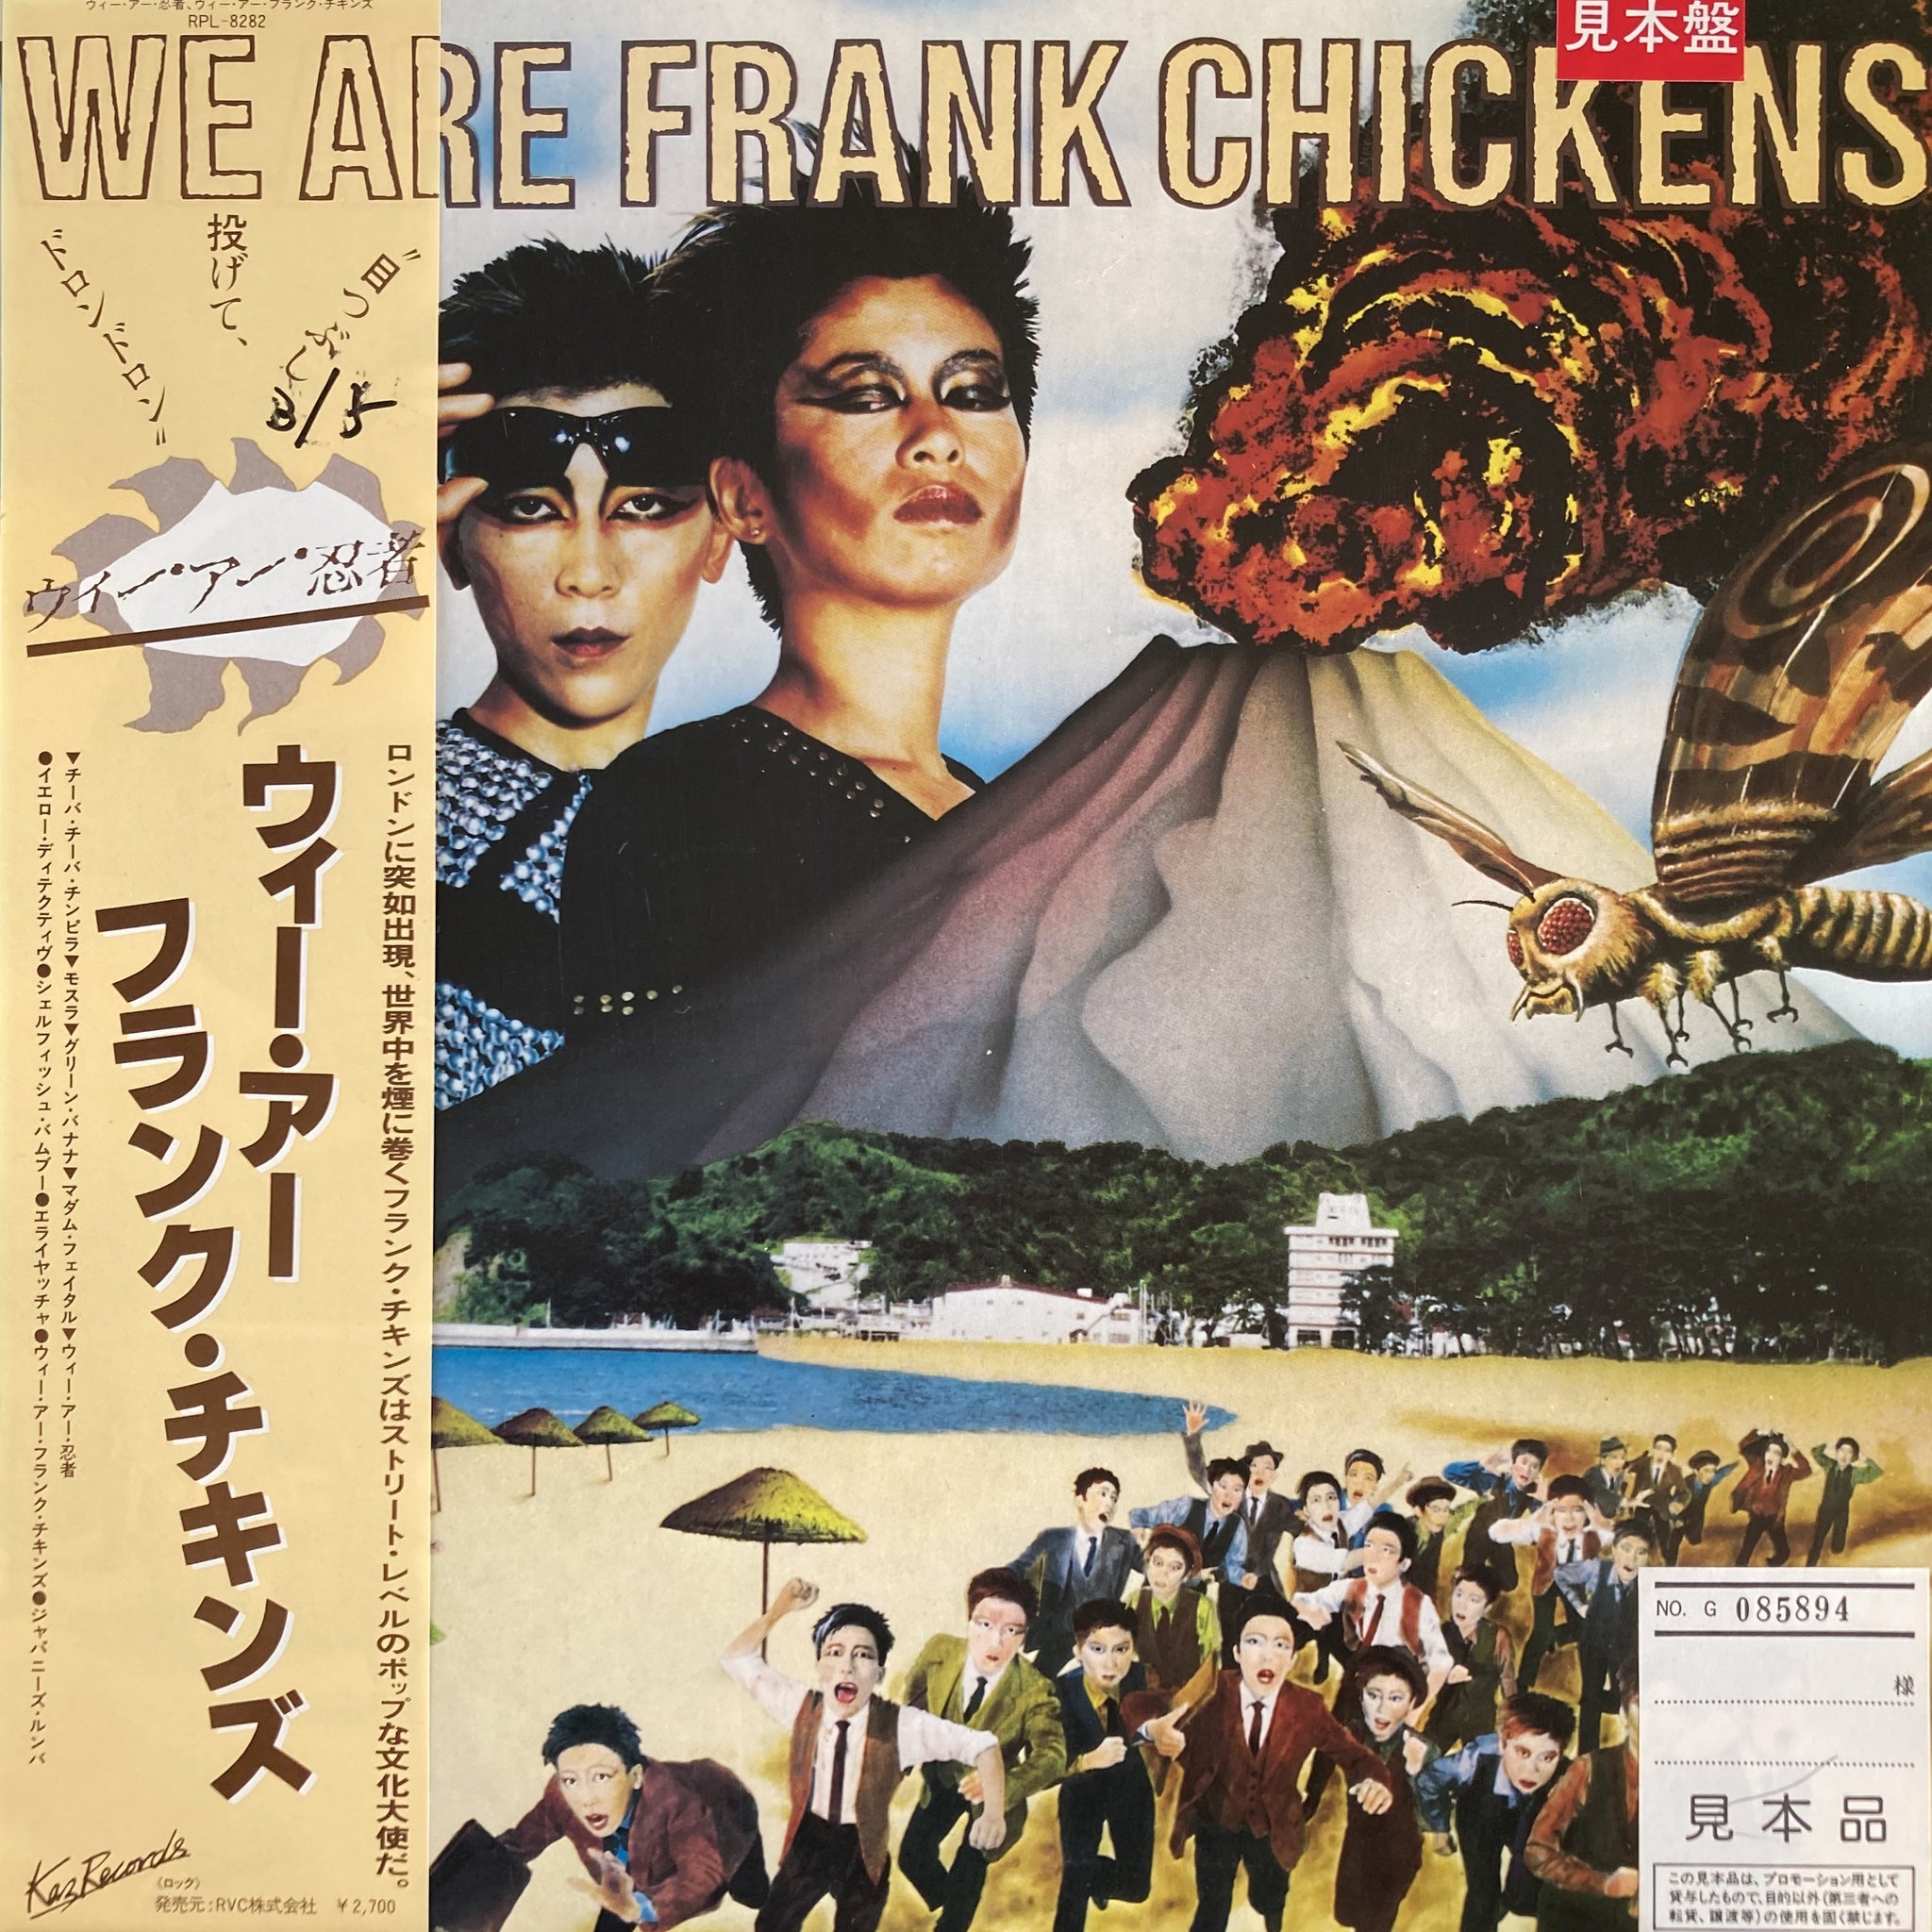 Frank Chickens - We Are Frank Chickens